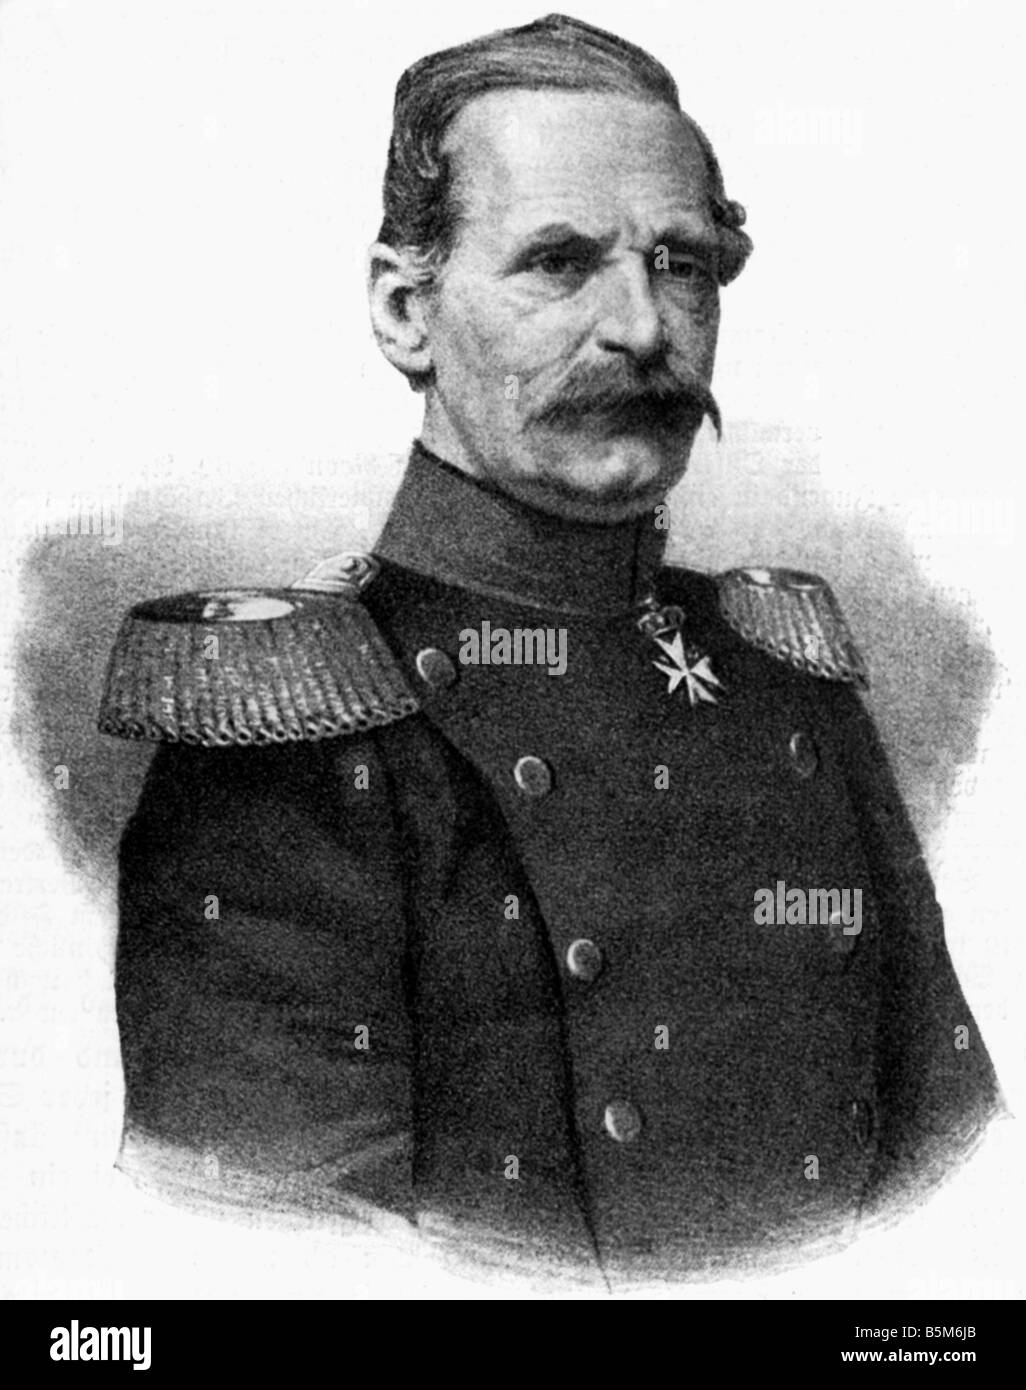 Roon, Albrecht Theodor Graf von, 30.4.1803 - 23.2.1879, Prussian general, Minister of War 1859 - 1873, portrait, lithograph, 1860, , Stock Photo